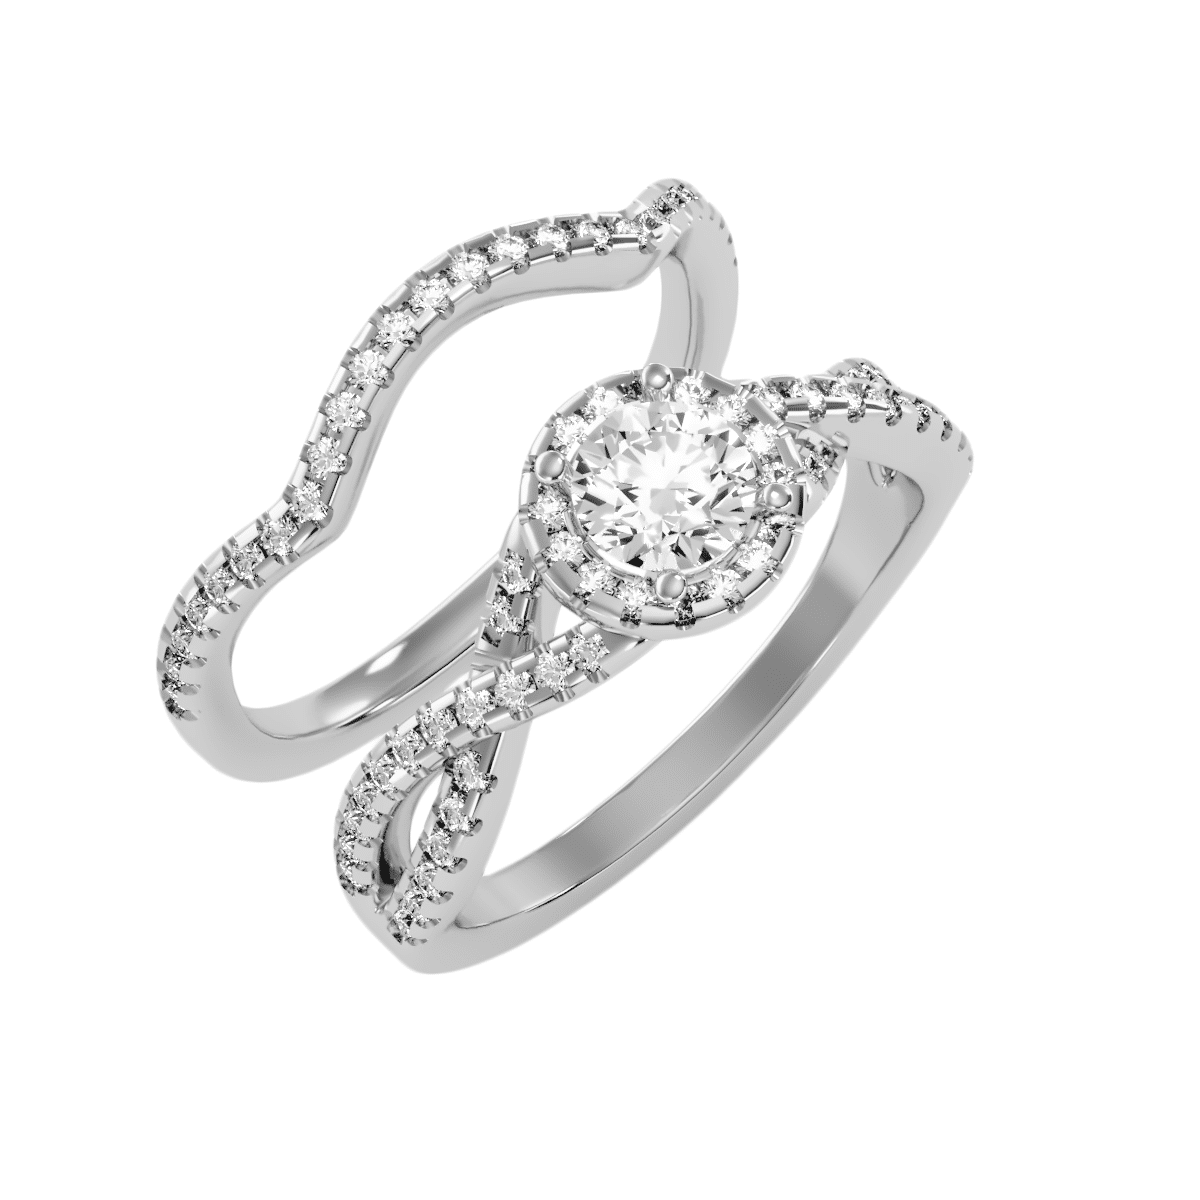 Cross Shank Engagement Ring With Matching Wedding Band